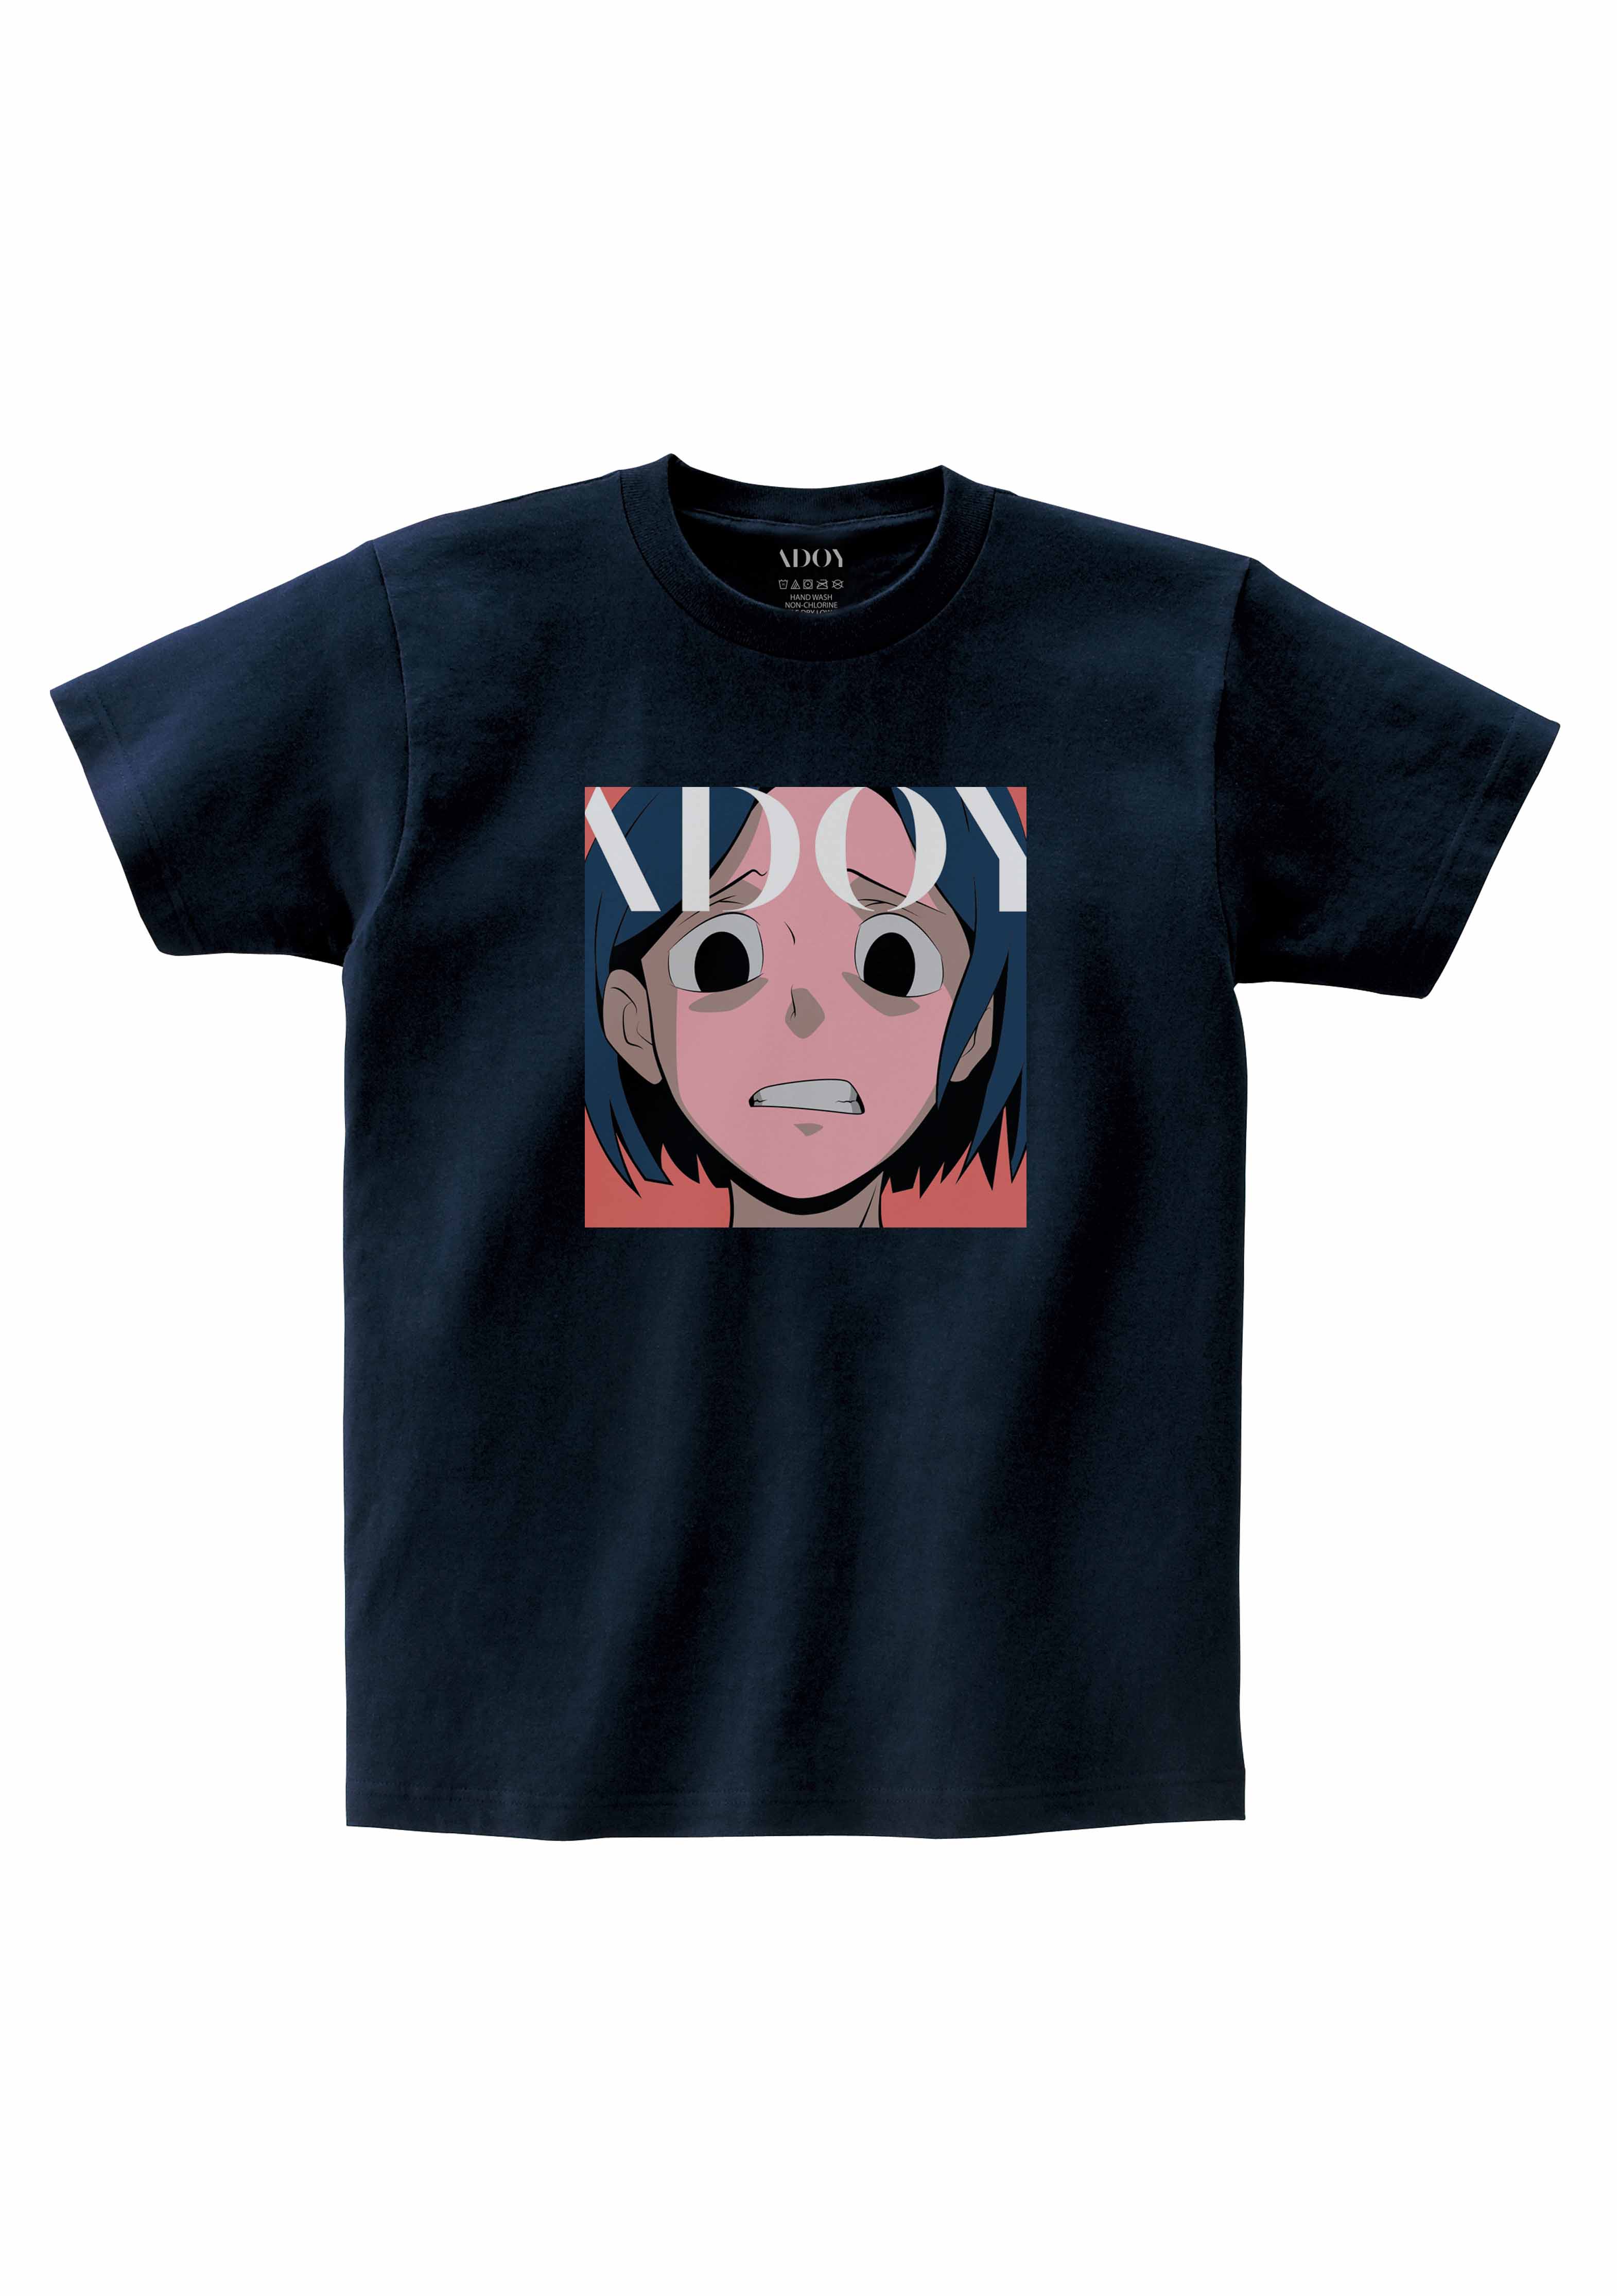 ADOY Collection Line T-Shirt (Vivid Navy)